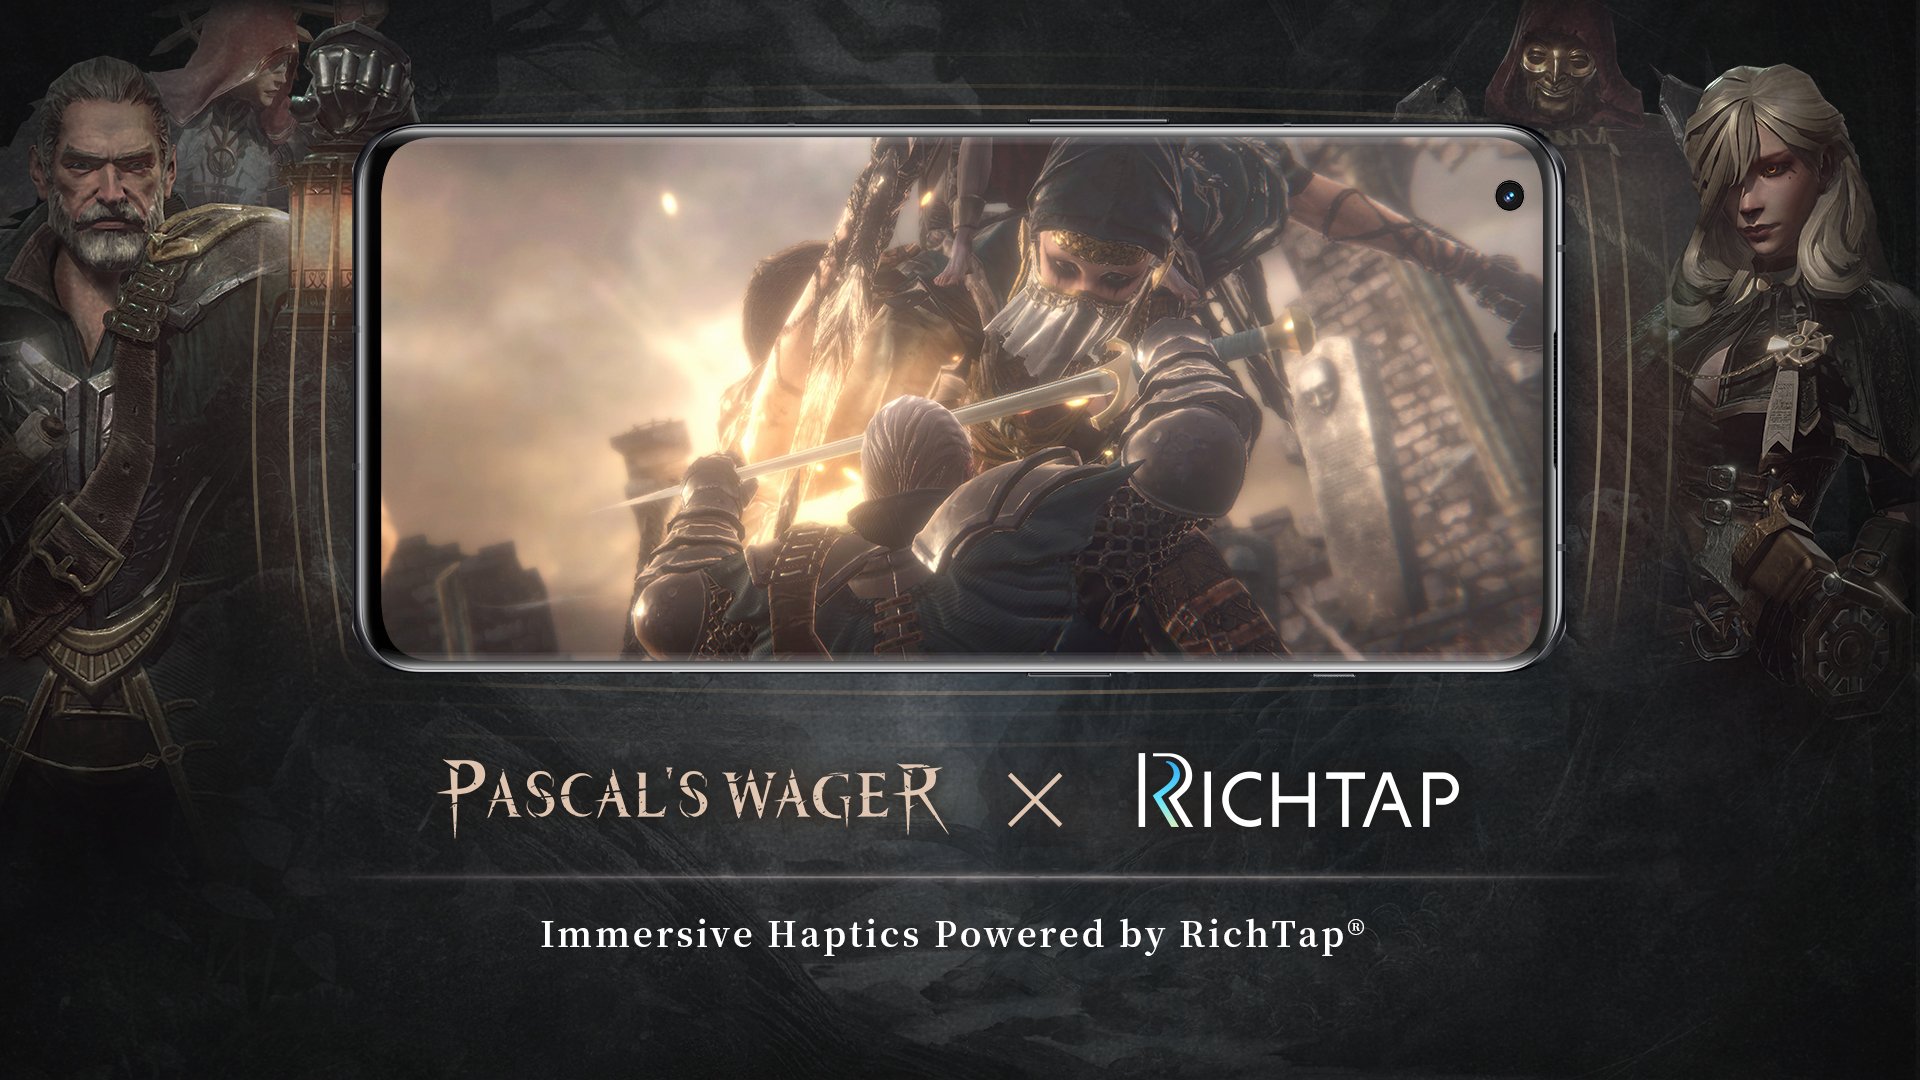 ‘Pascal’s Wager’ New iOS Update Adds Haptic Feedback Support for Cut-Scenes, Combat, and More